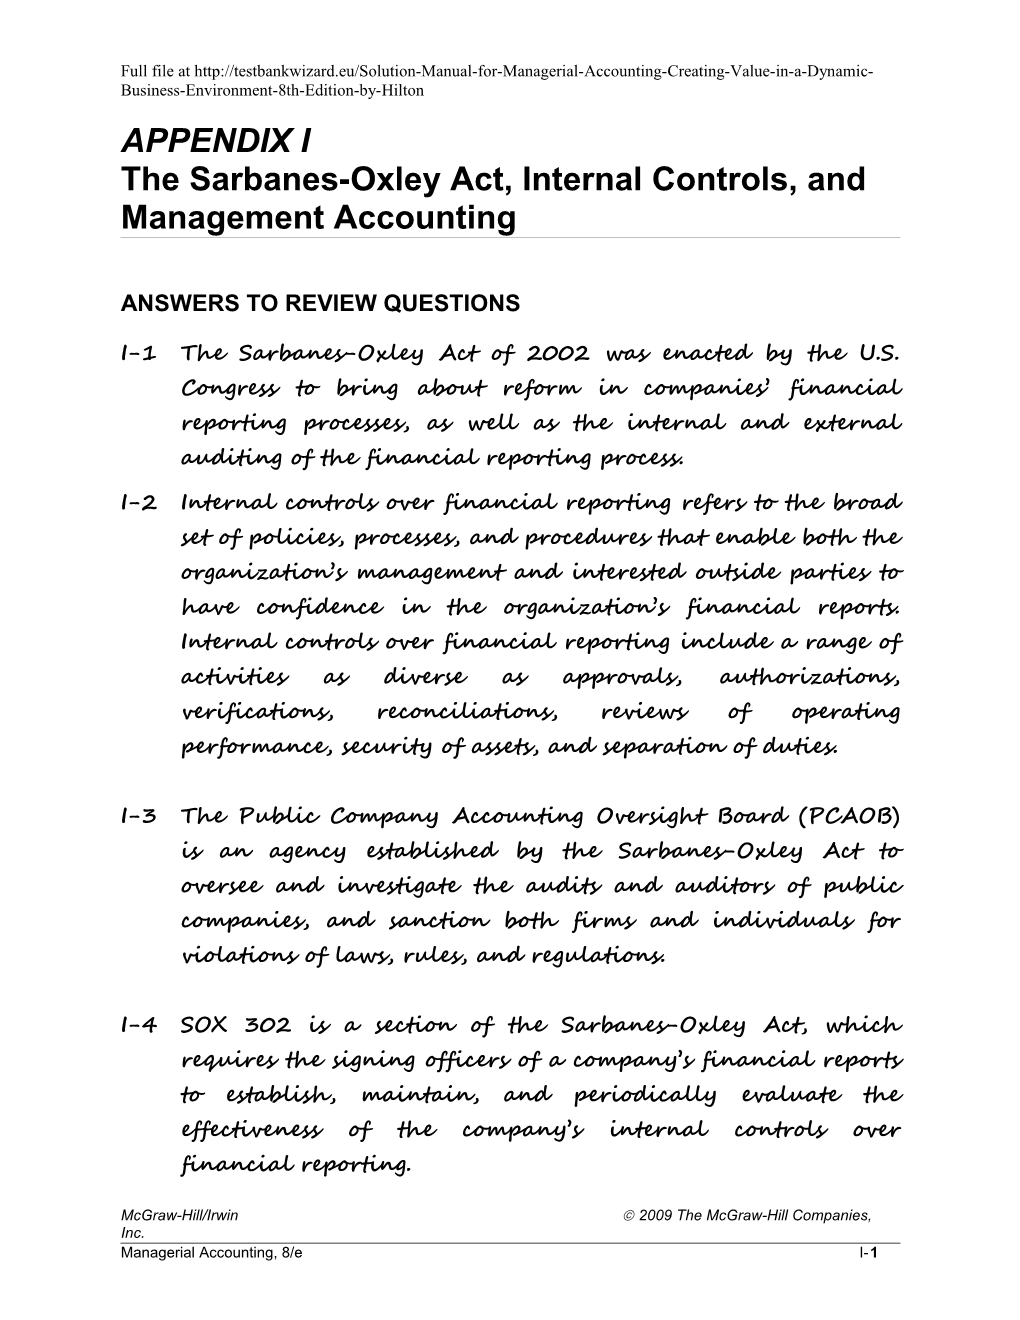 The Sarbanes-Oxley Act, Internal Controls, and Management Accounting